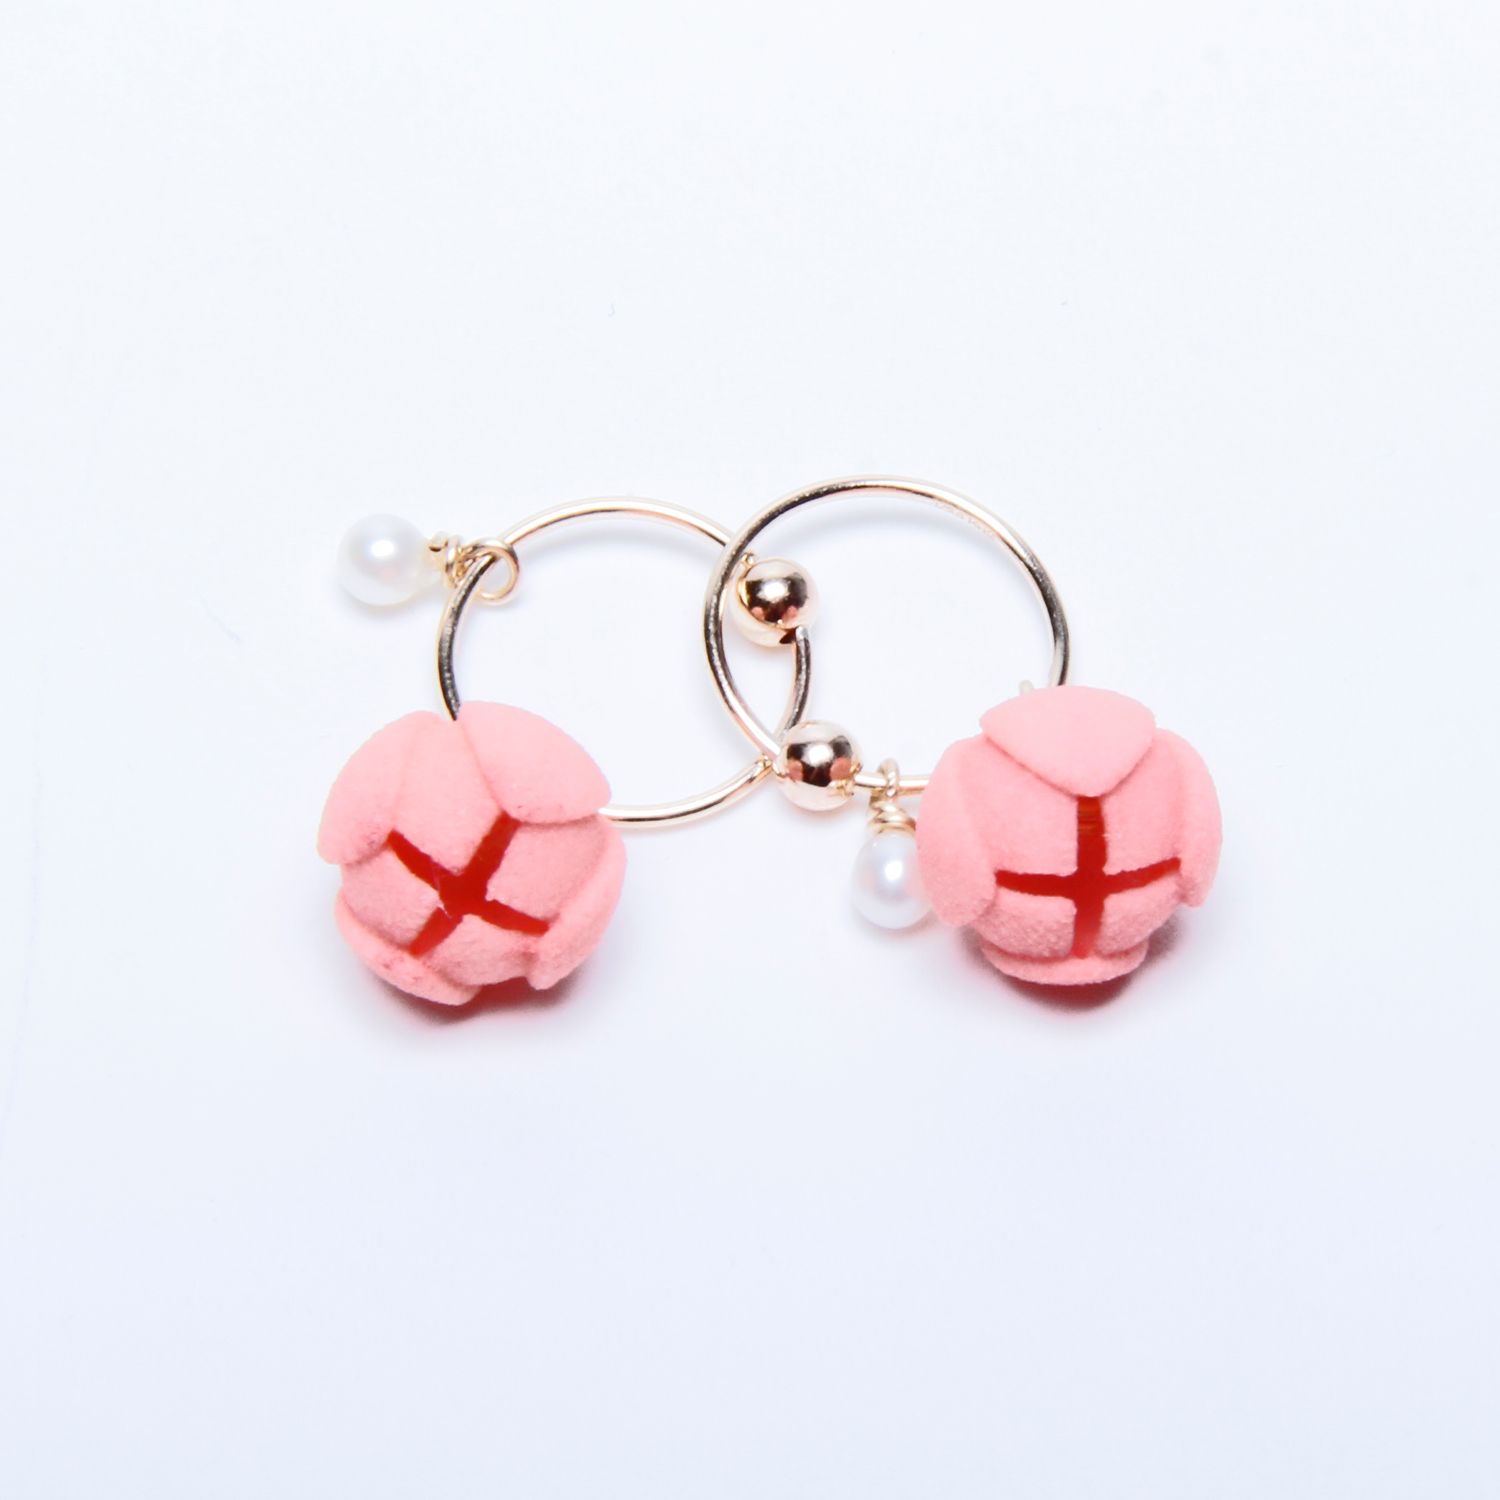 Temino Jewellery: Small Bud Earrings in Pink Product Image 2 of 2